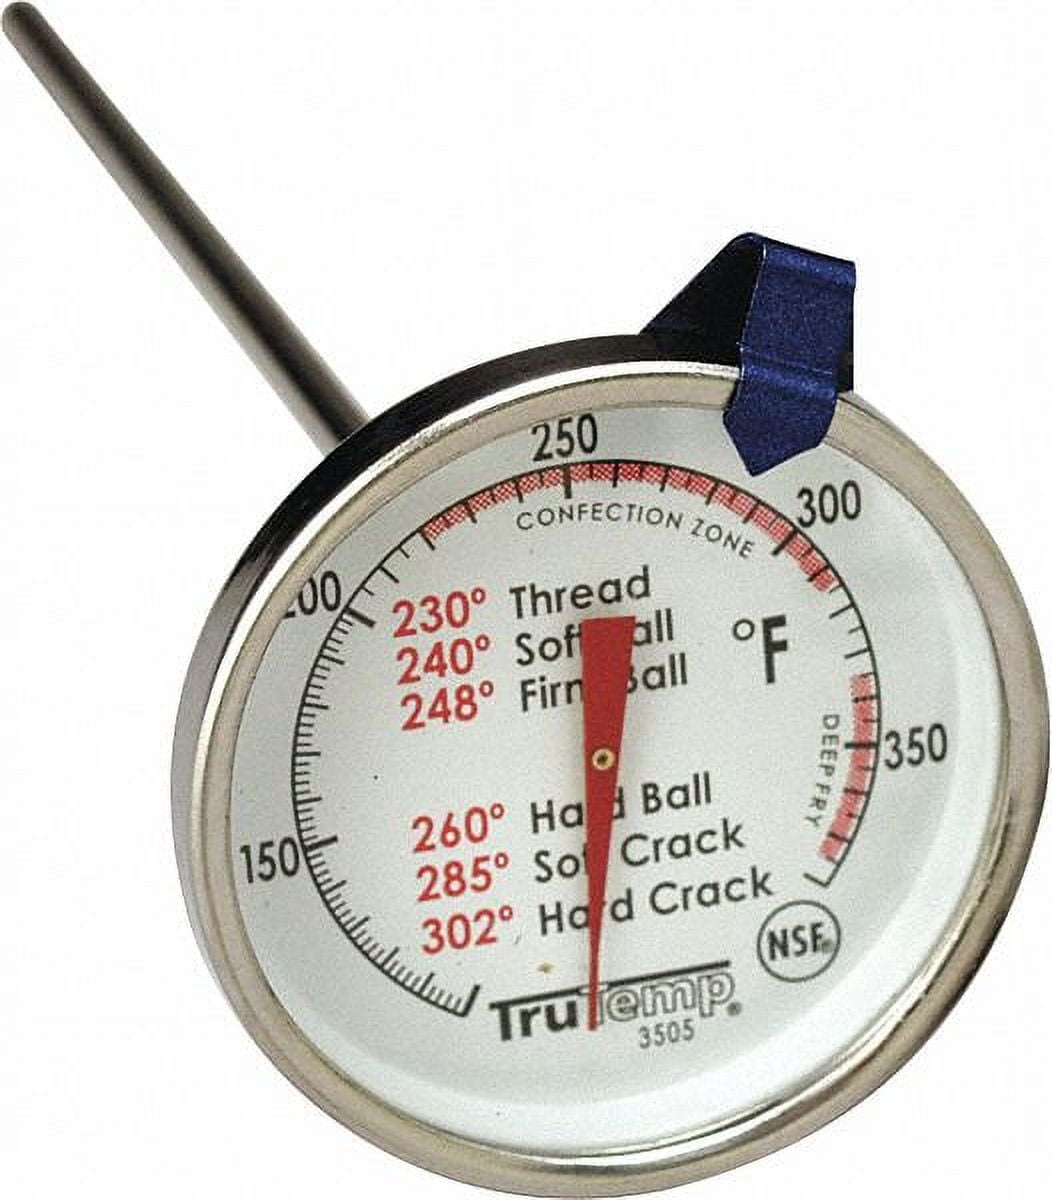 Taylor 5983N 12 Candy/Deep Fry Thermometer - Ford Hotel Supply